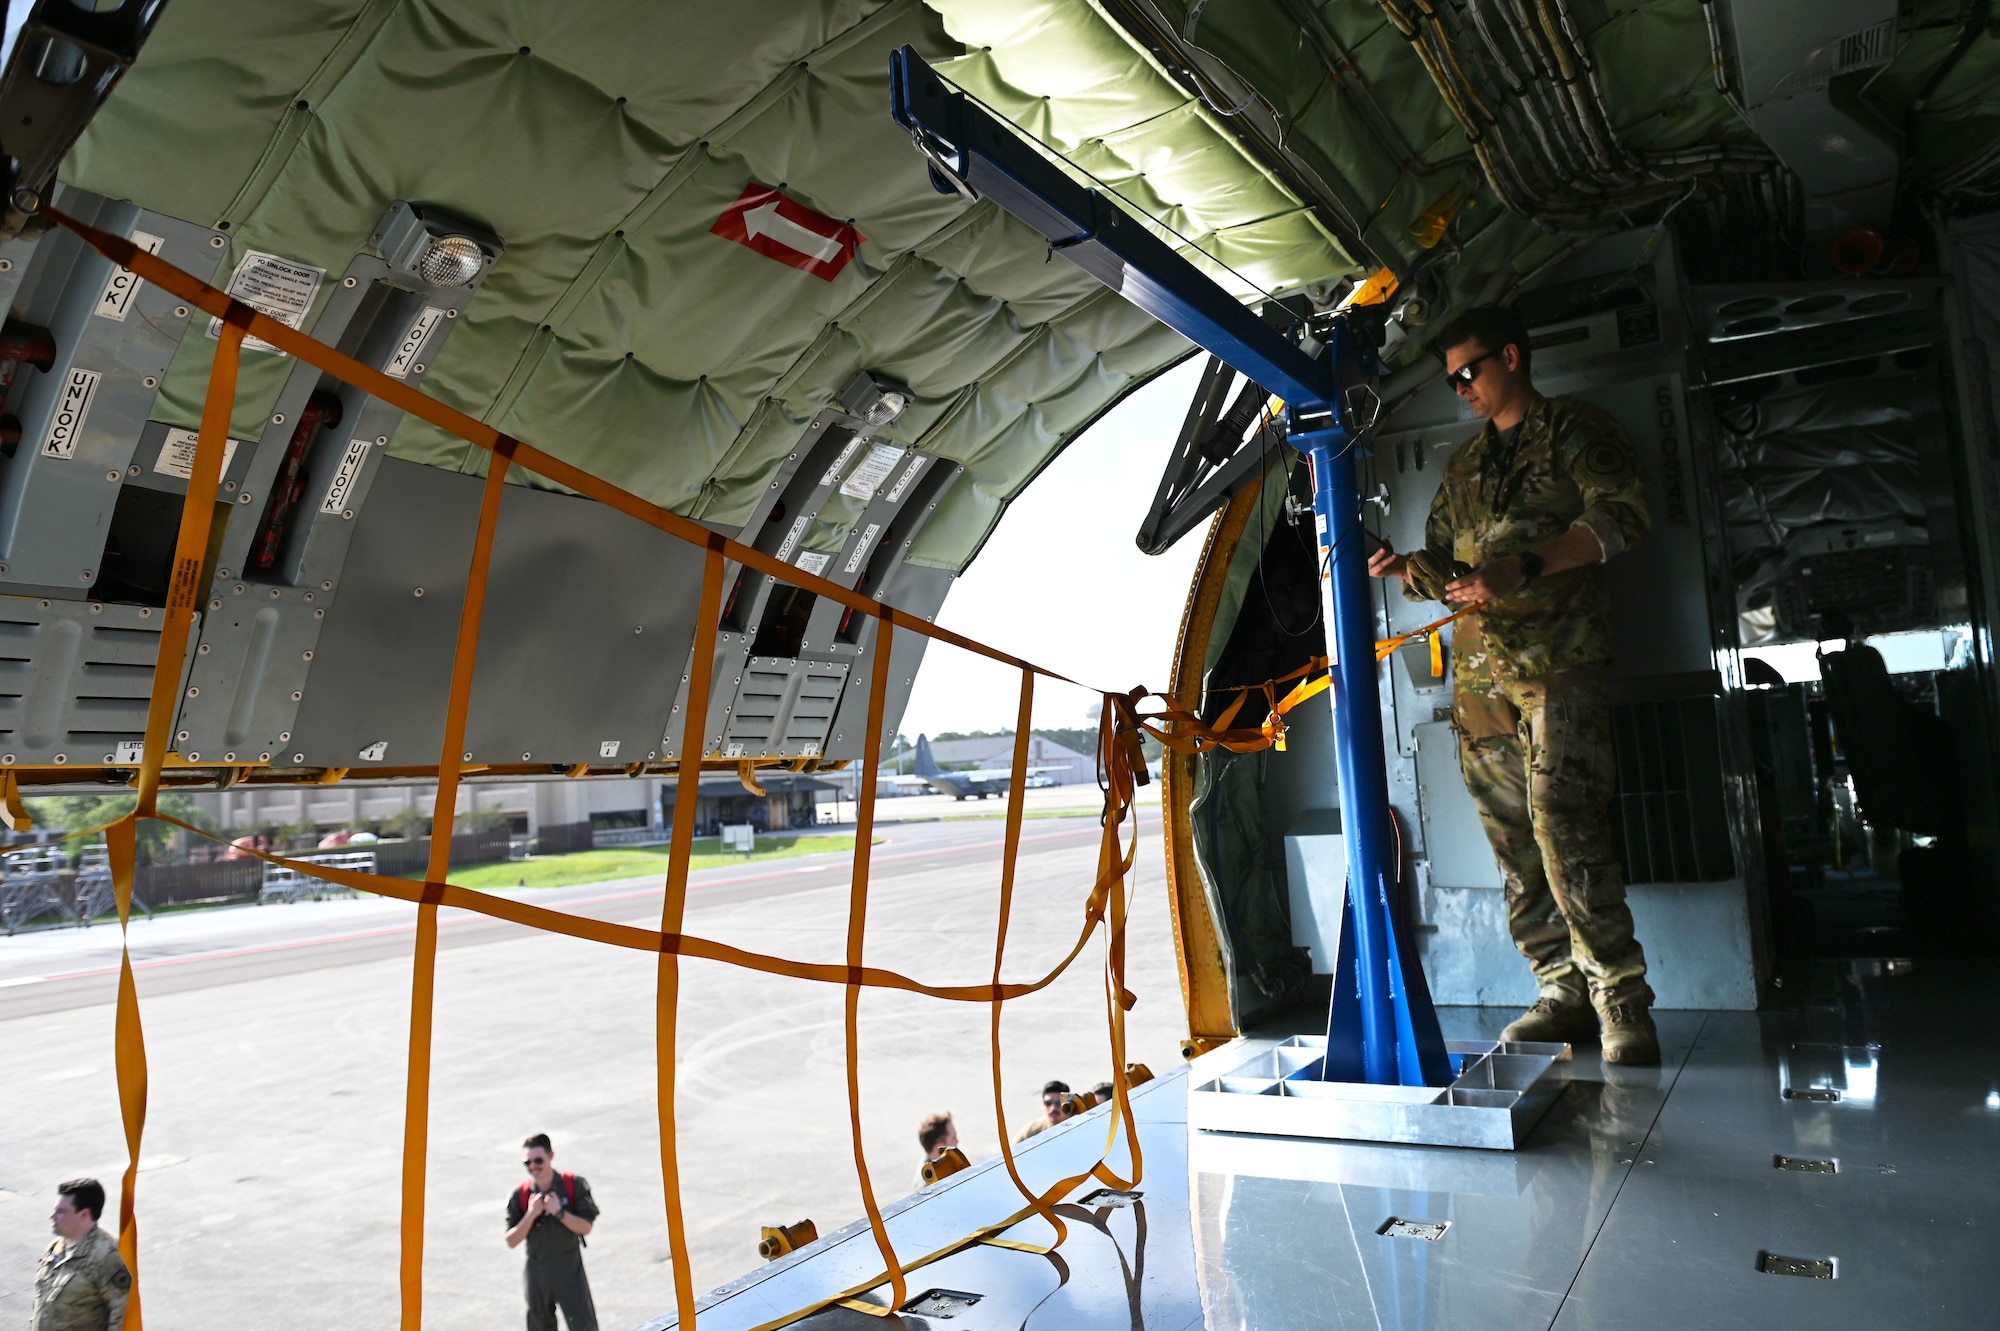 U.S. Air Force Tech. Sgt. Nicholas Sowder, 509th Weapons Squadron Advanced Instructor Training cadre and inflight refueling specialist, closes the cargo door of KC-135 Stratotanker next to the Pack and Transport Reloader crane (PATR) prototype at Hurlburt Field, Florida, May 6, 2023. Airmen from the 509th WPS tested a new prototype PATR crane during an integration training at a special operations forces exercise at Hurlburt Field. (U.S. Air Force photo by Staff Sgt. Lawrence Sena)